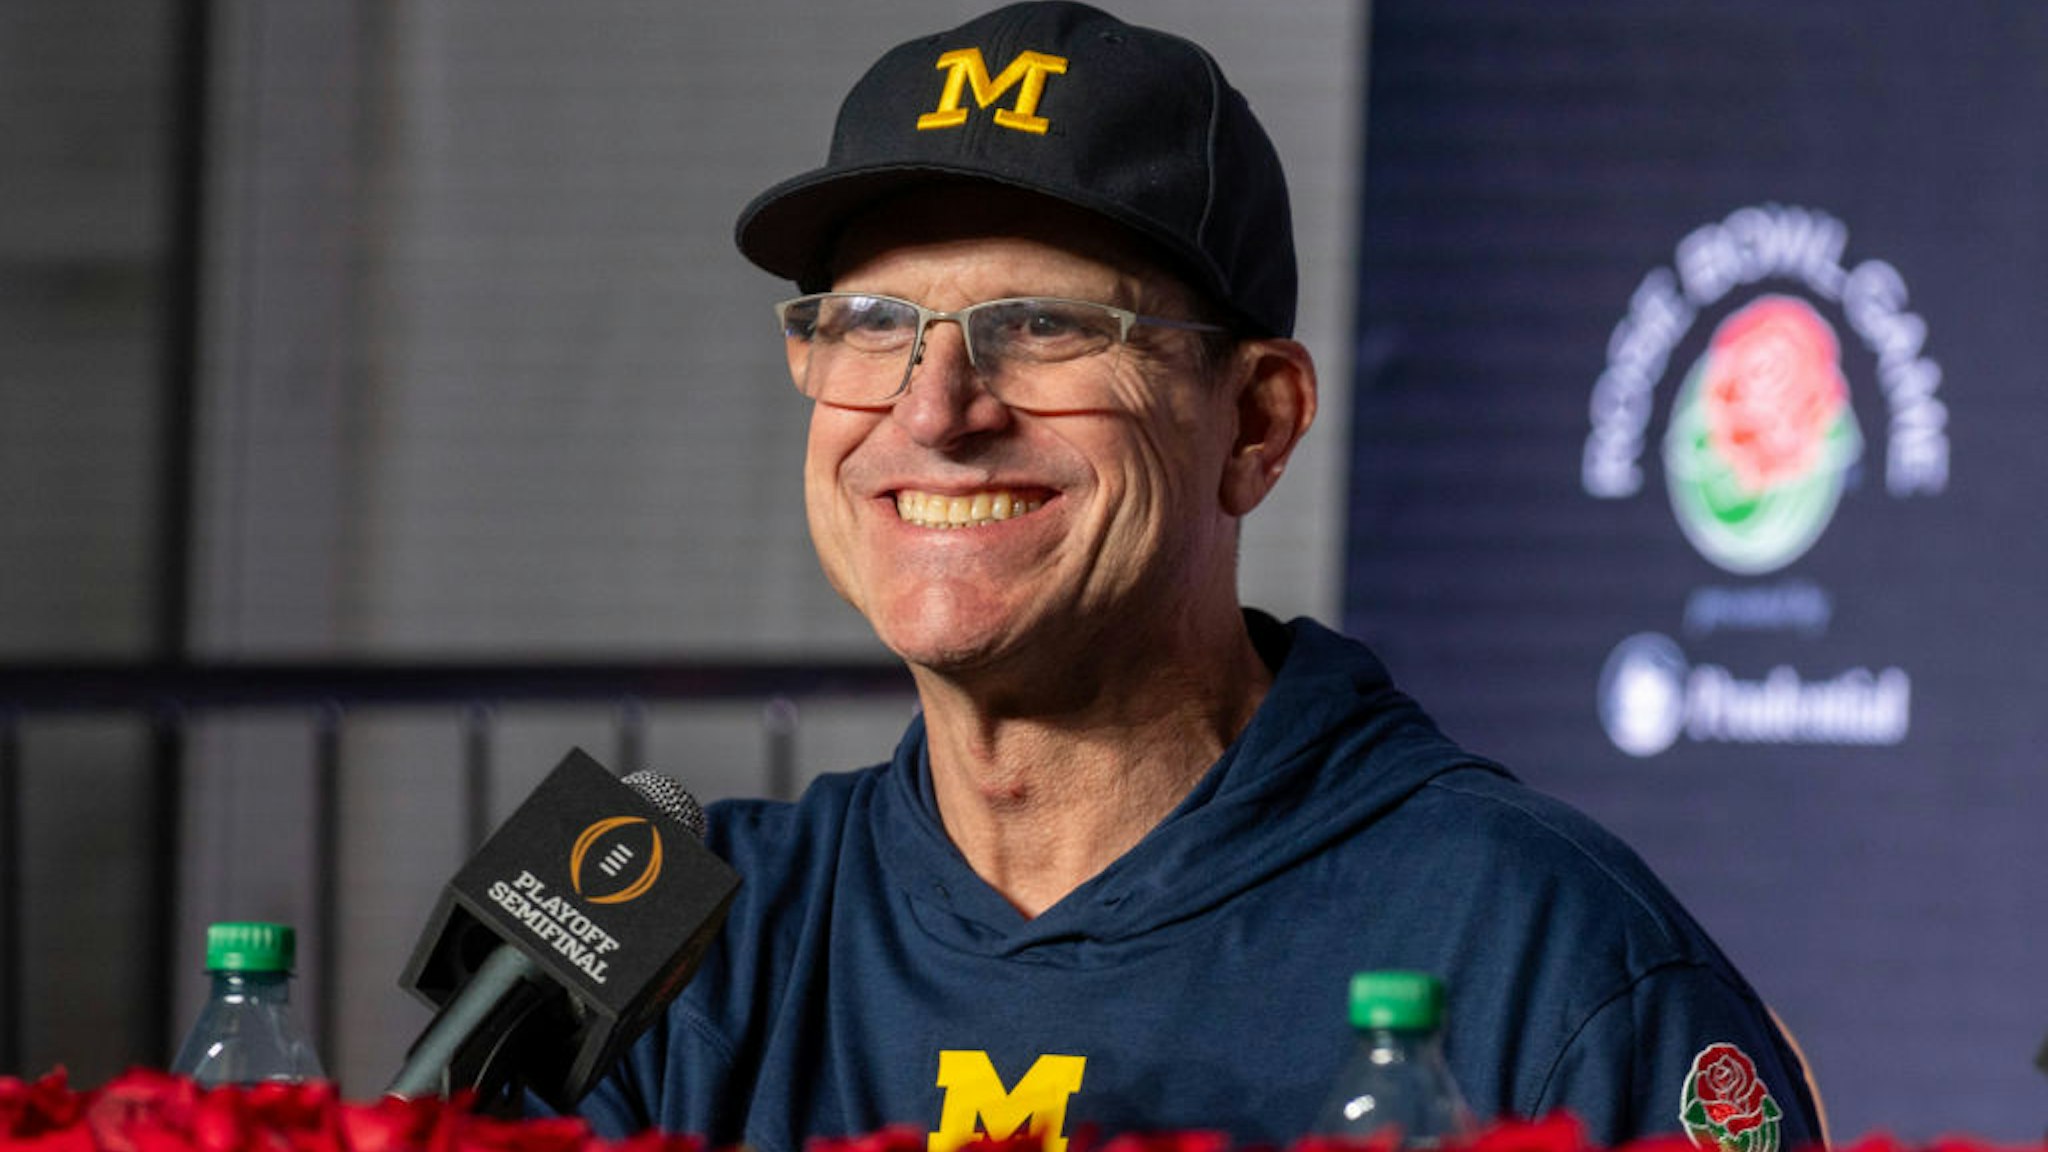 PASADENA, CALIFORNIA - JANUARY 01: Head Coach Jim Harbaugh of the Michigan Wolverines speaks to media during the post game press conference after the CFP Semifinal Rose Bowl Game against the Alabama Crimson Tide at Rose Bowl Stadium on January 01, 2024 in Pasadena, California. The Michigan Wolverines won the game 27-20 in overtime. (Photo by Aaron J. Thornton/Getty Images)